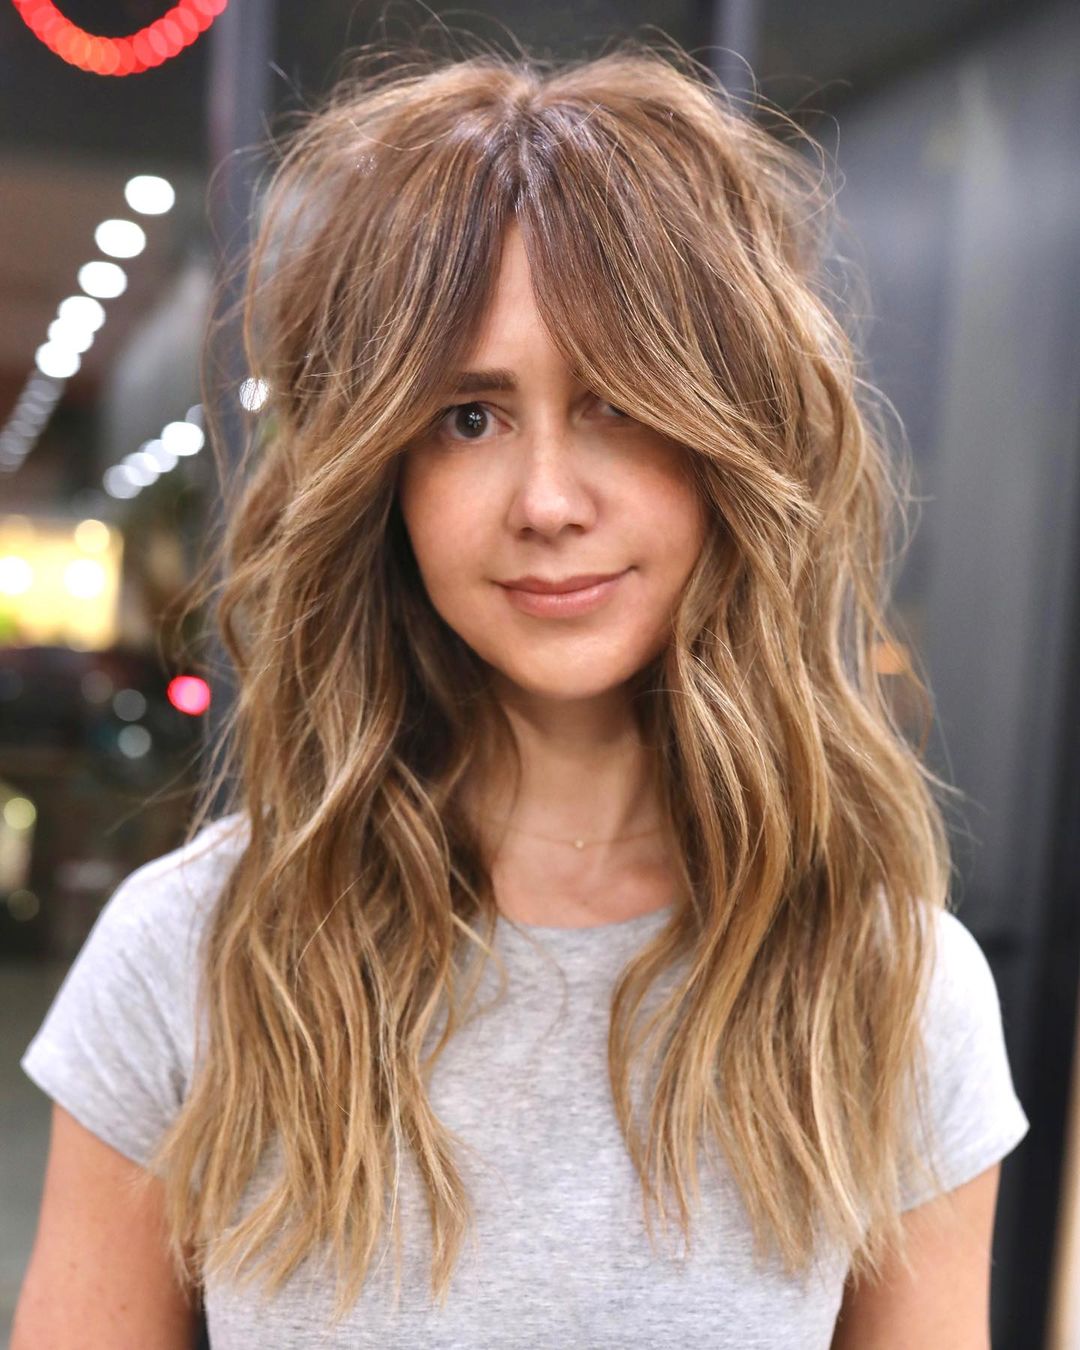 25 Ideas for Fall Hairstyles with Curtain Bangs